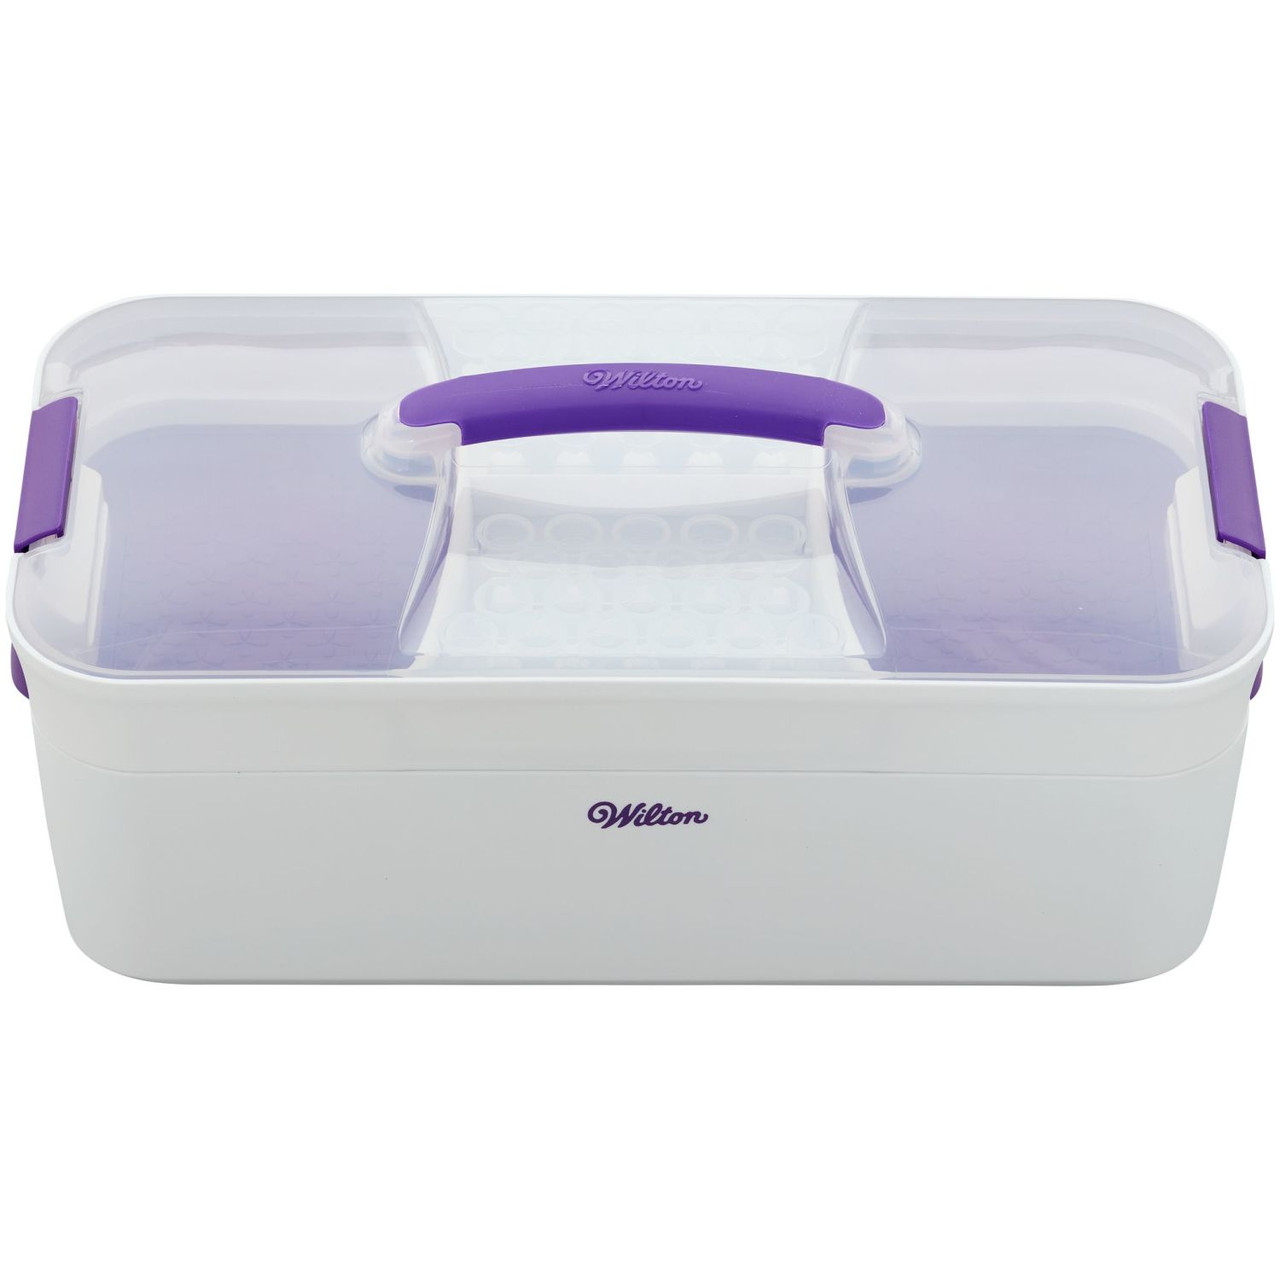 Wilton - Wilton The Ultimate 3 In 1 Caddy, Shop